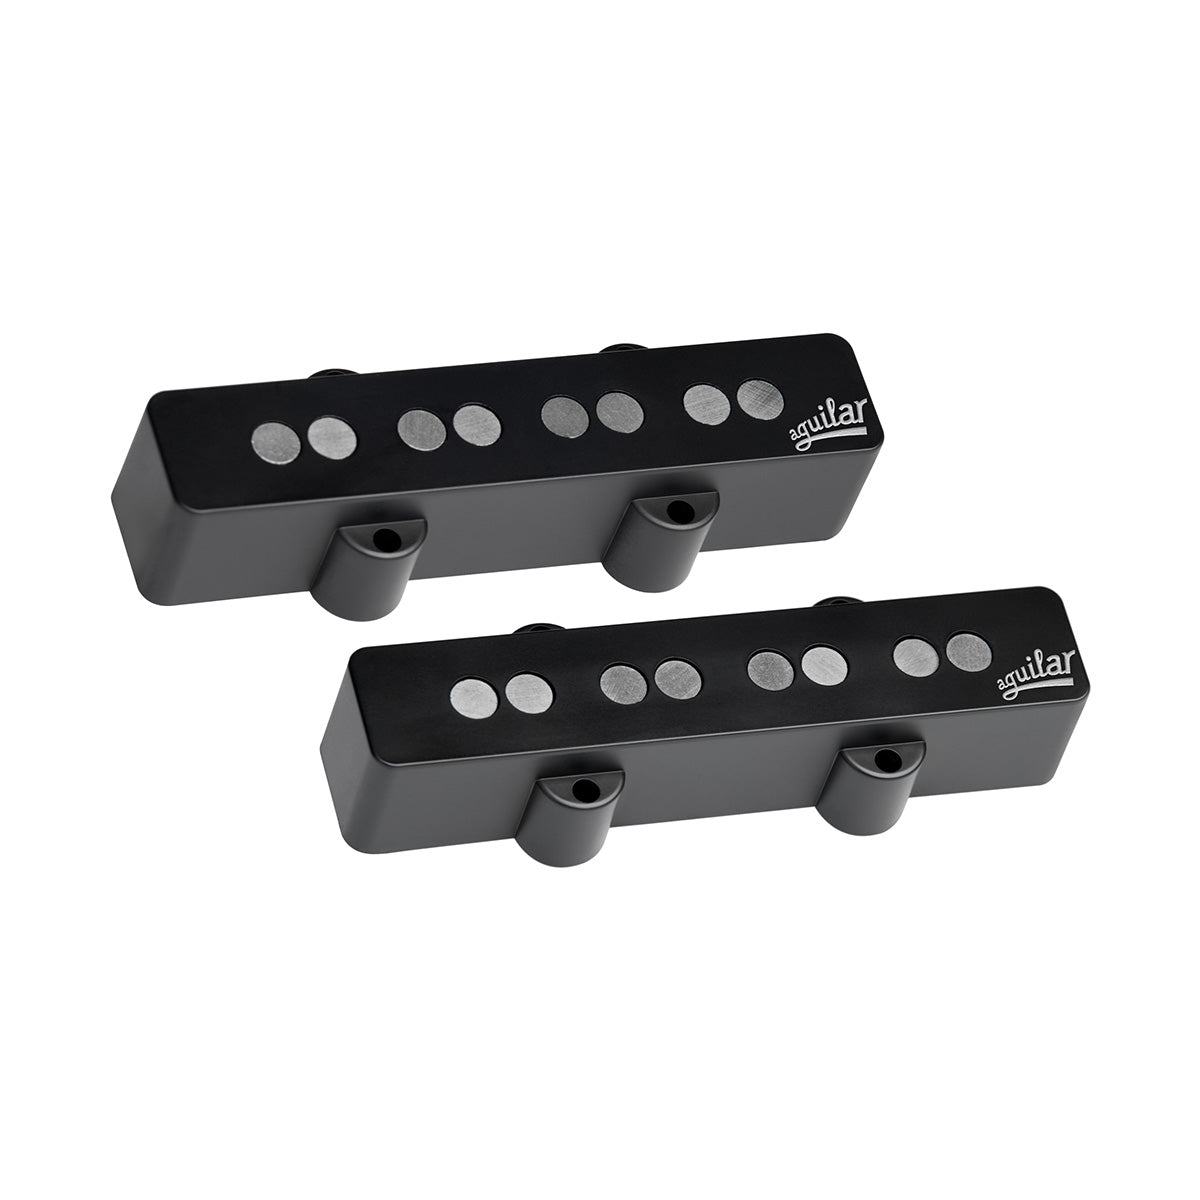 Aguilar AG 4J-HOT 4-string Overwound Jazz Bass Pickup Set  by Aguilar Shop